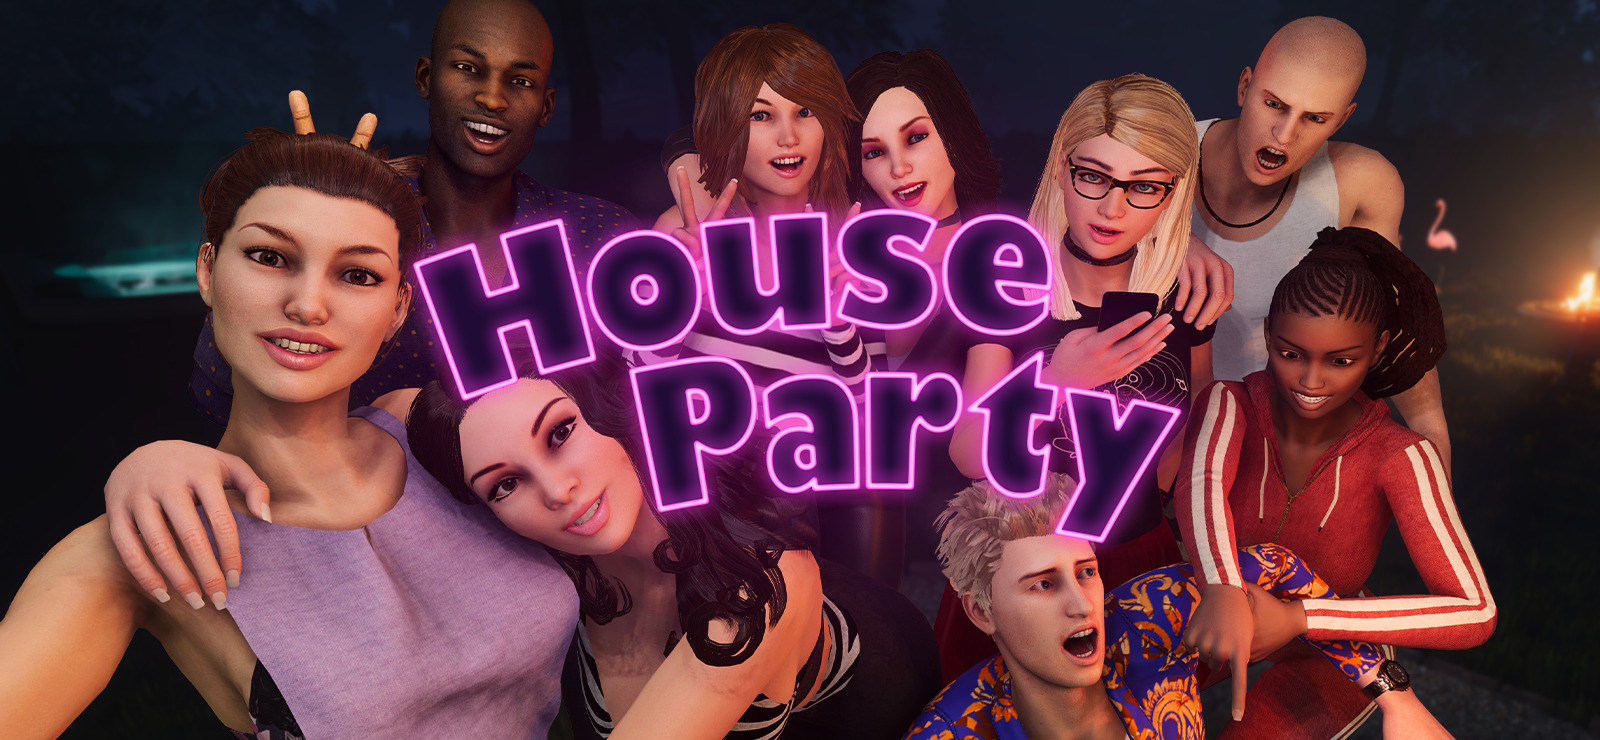 house party game save file location